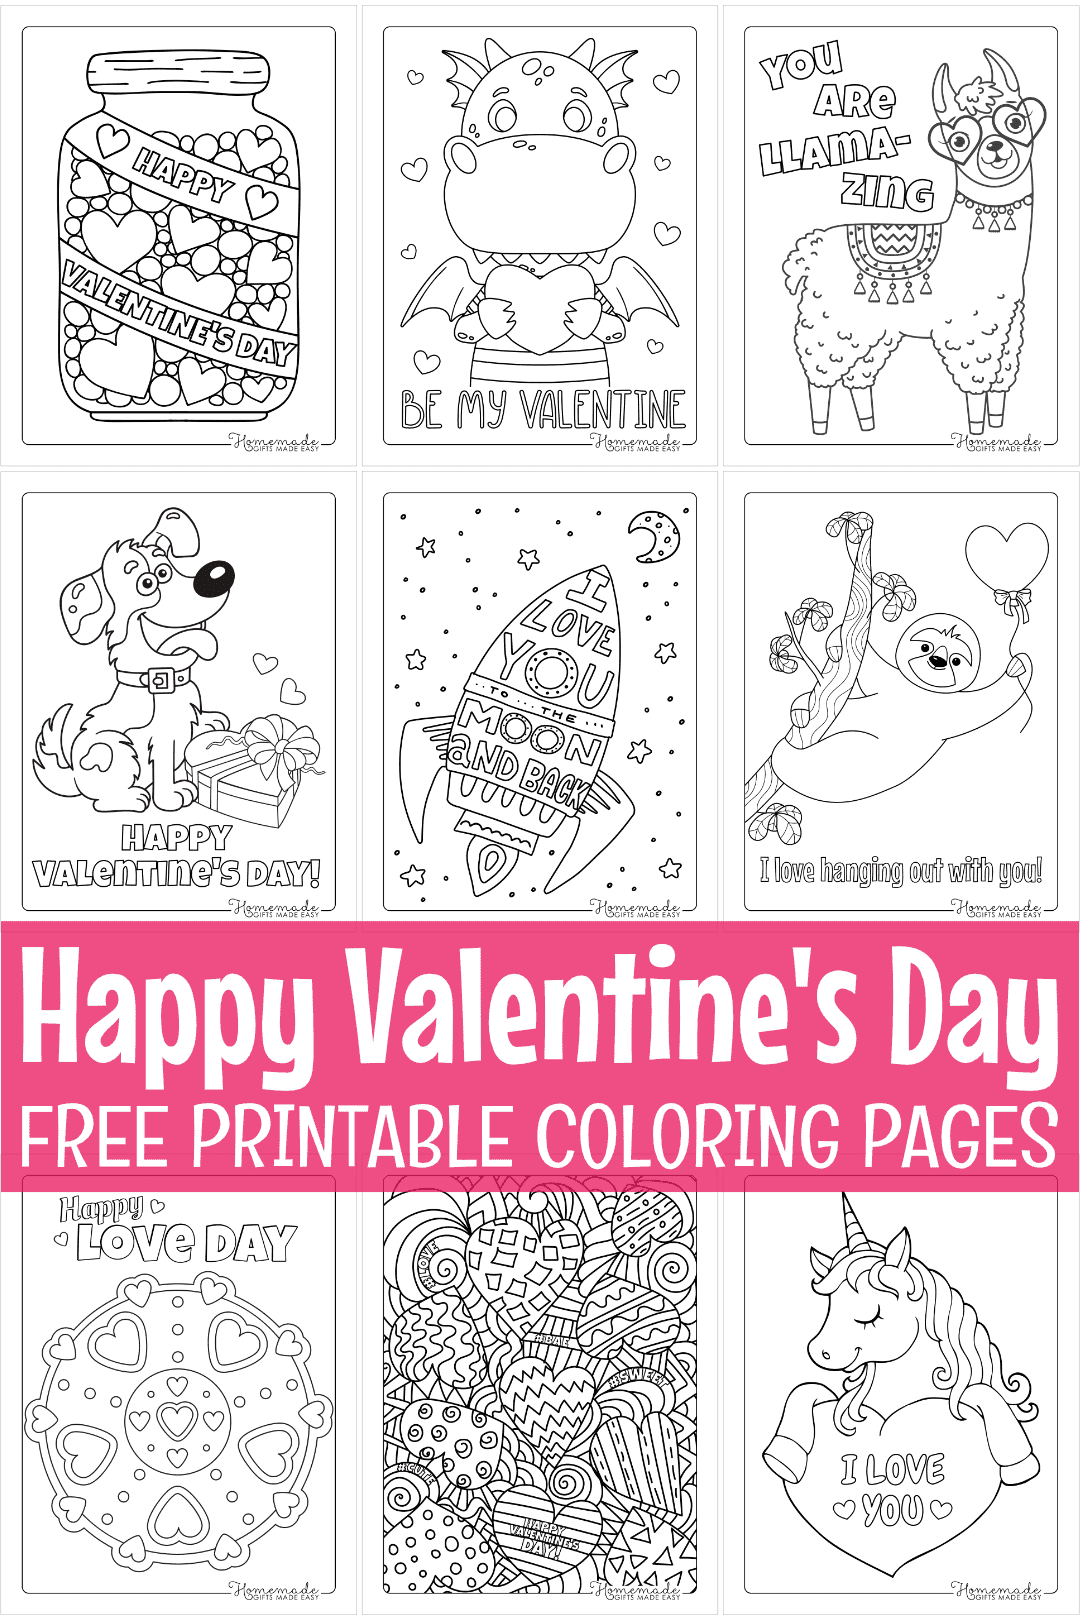 Free Printable Valentines Coloring Pages PRINTABLE TEMPLATES